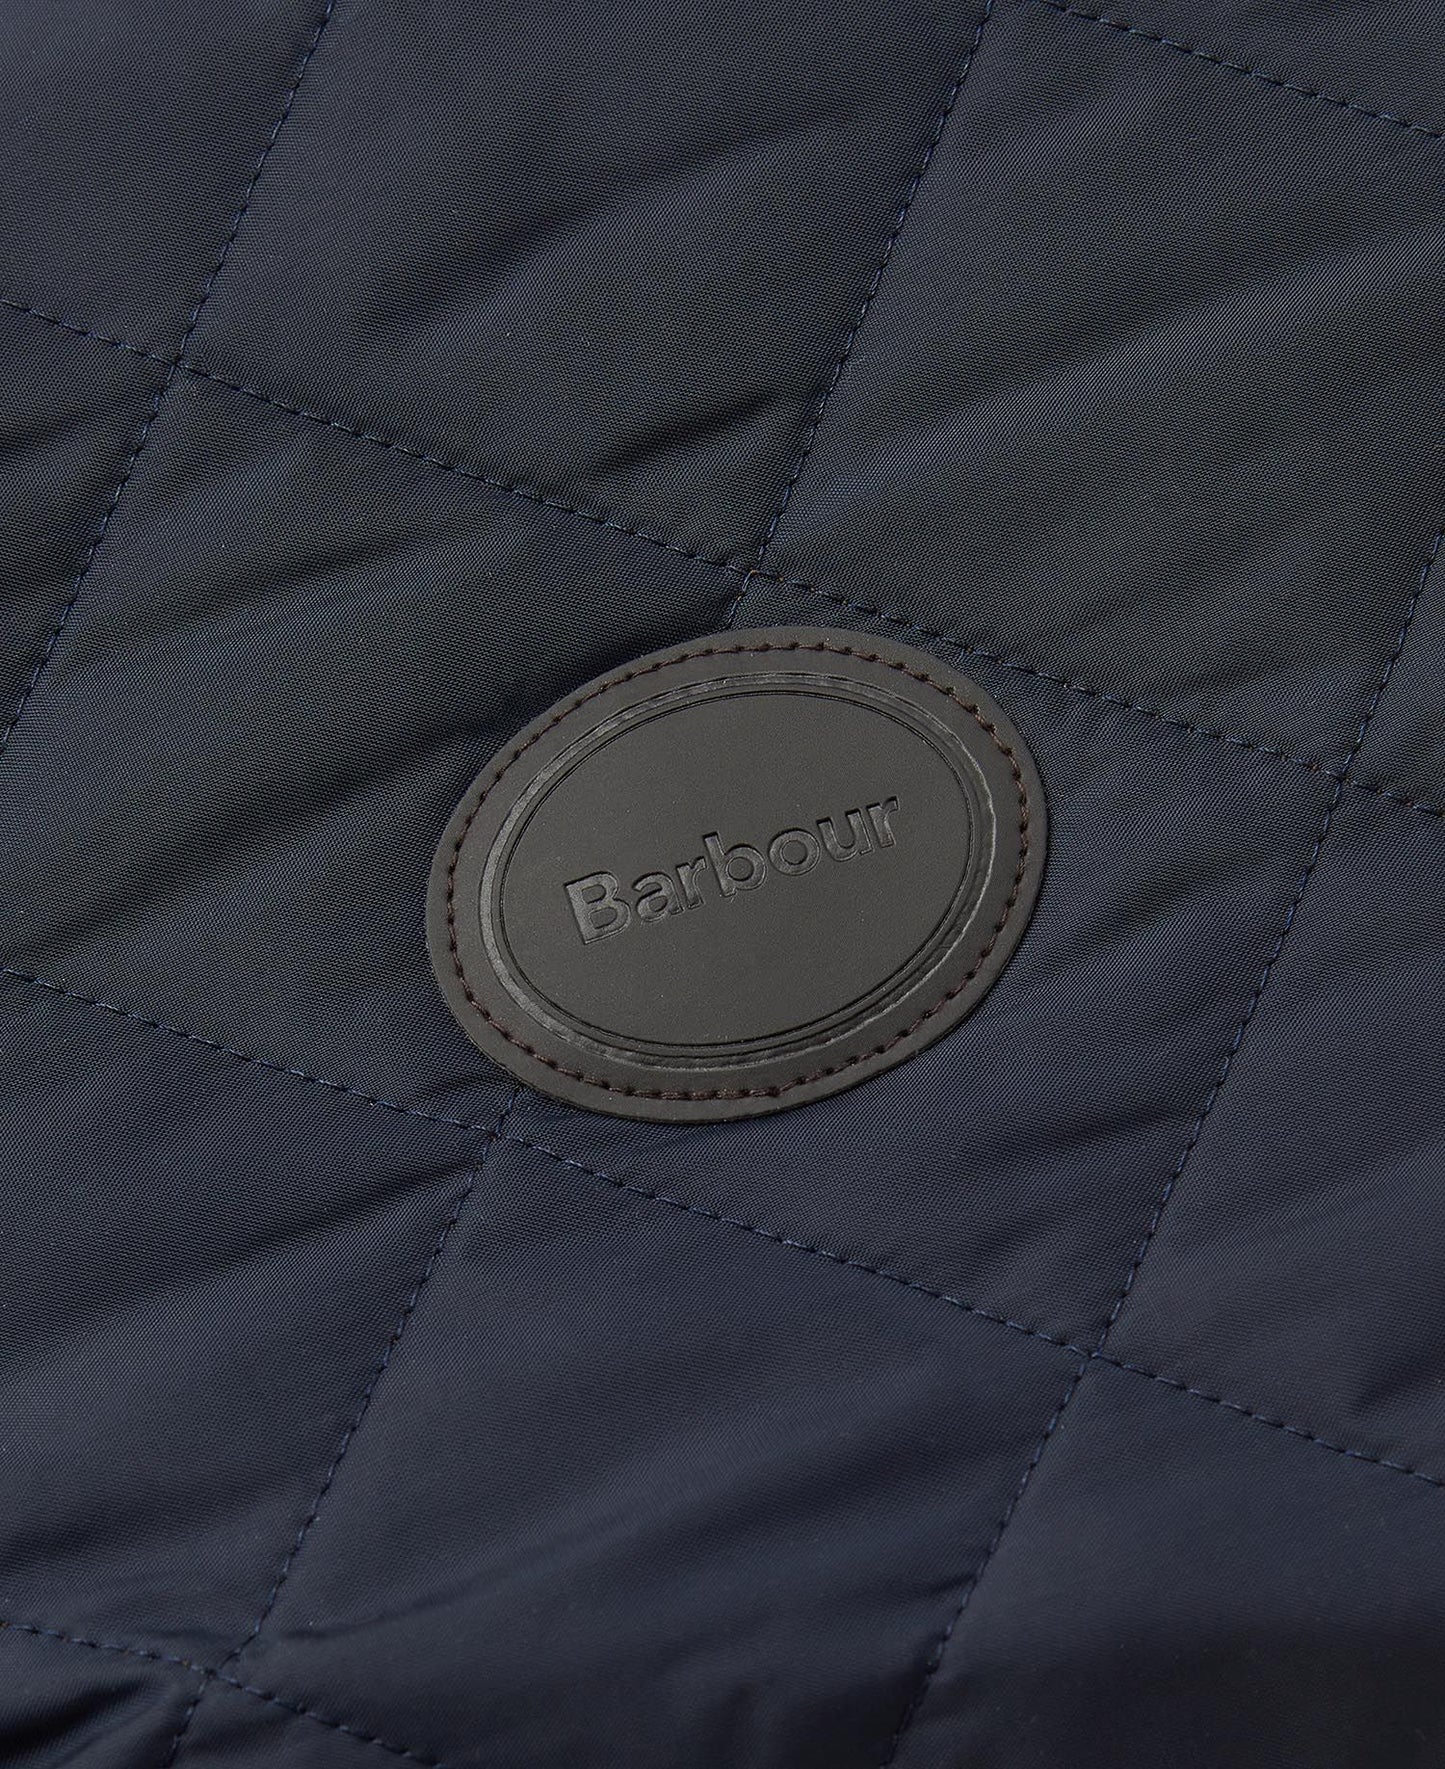 Barbour Quilted Dog Coat Navy